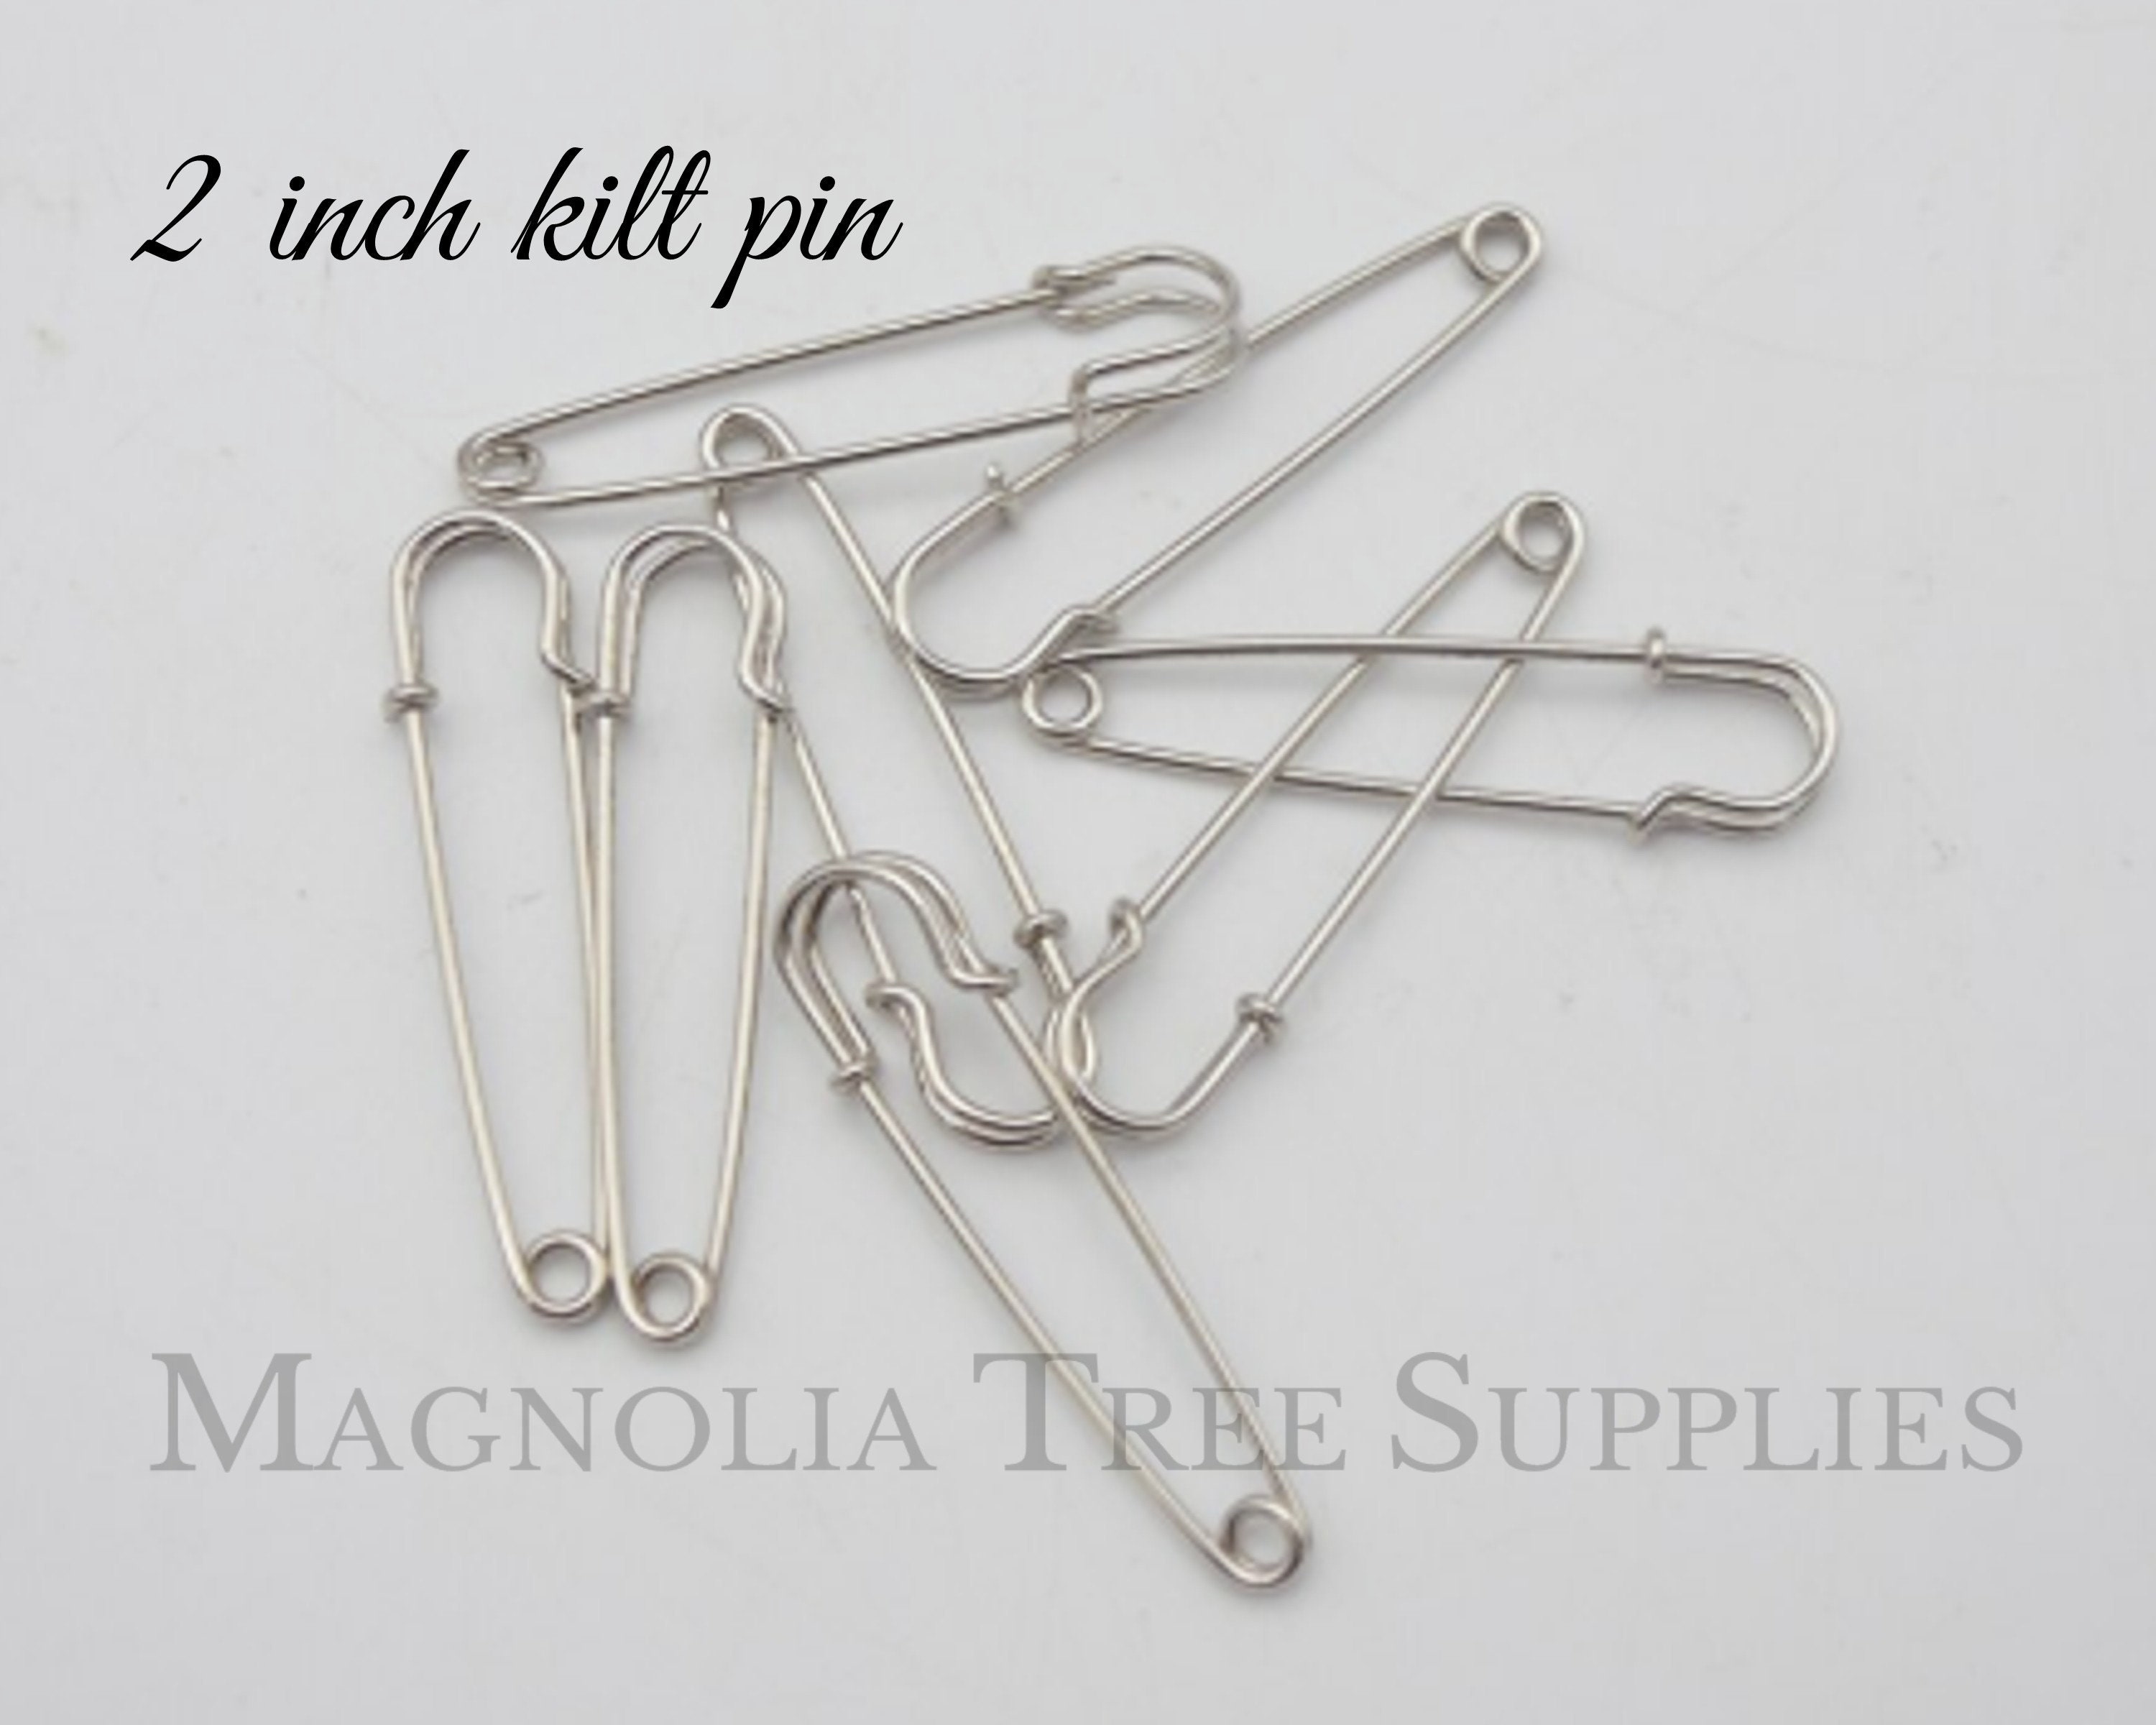 POYOGA 10 Pcs/Set Silver Tone Safety Pins Large Strong Heavy Duty Pinning  Findings DIY Sewing Tools for Clothes Crafts Sewing 